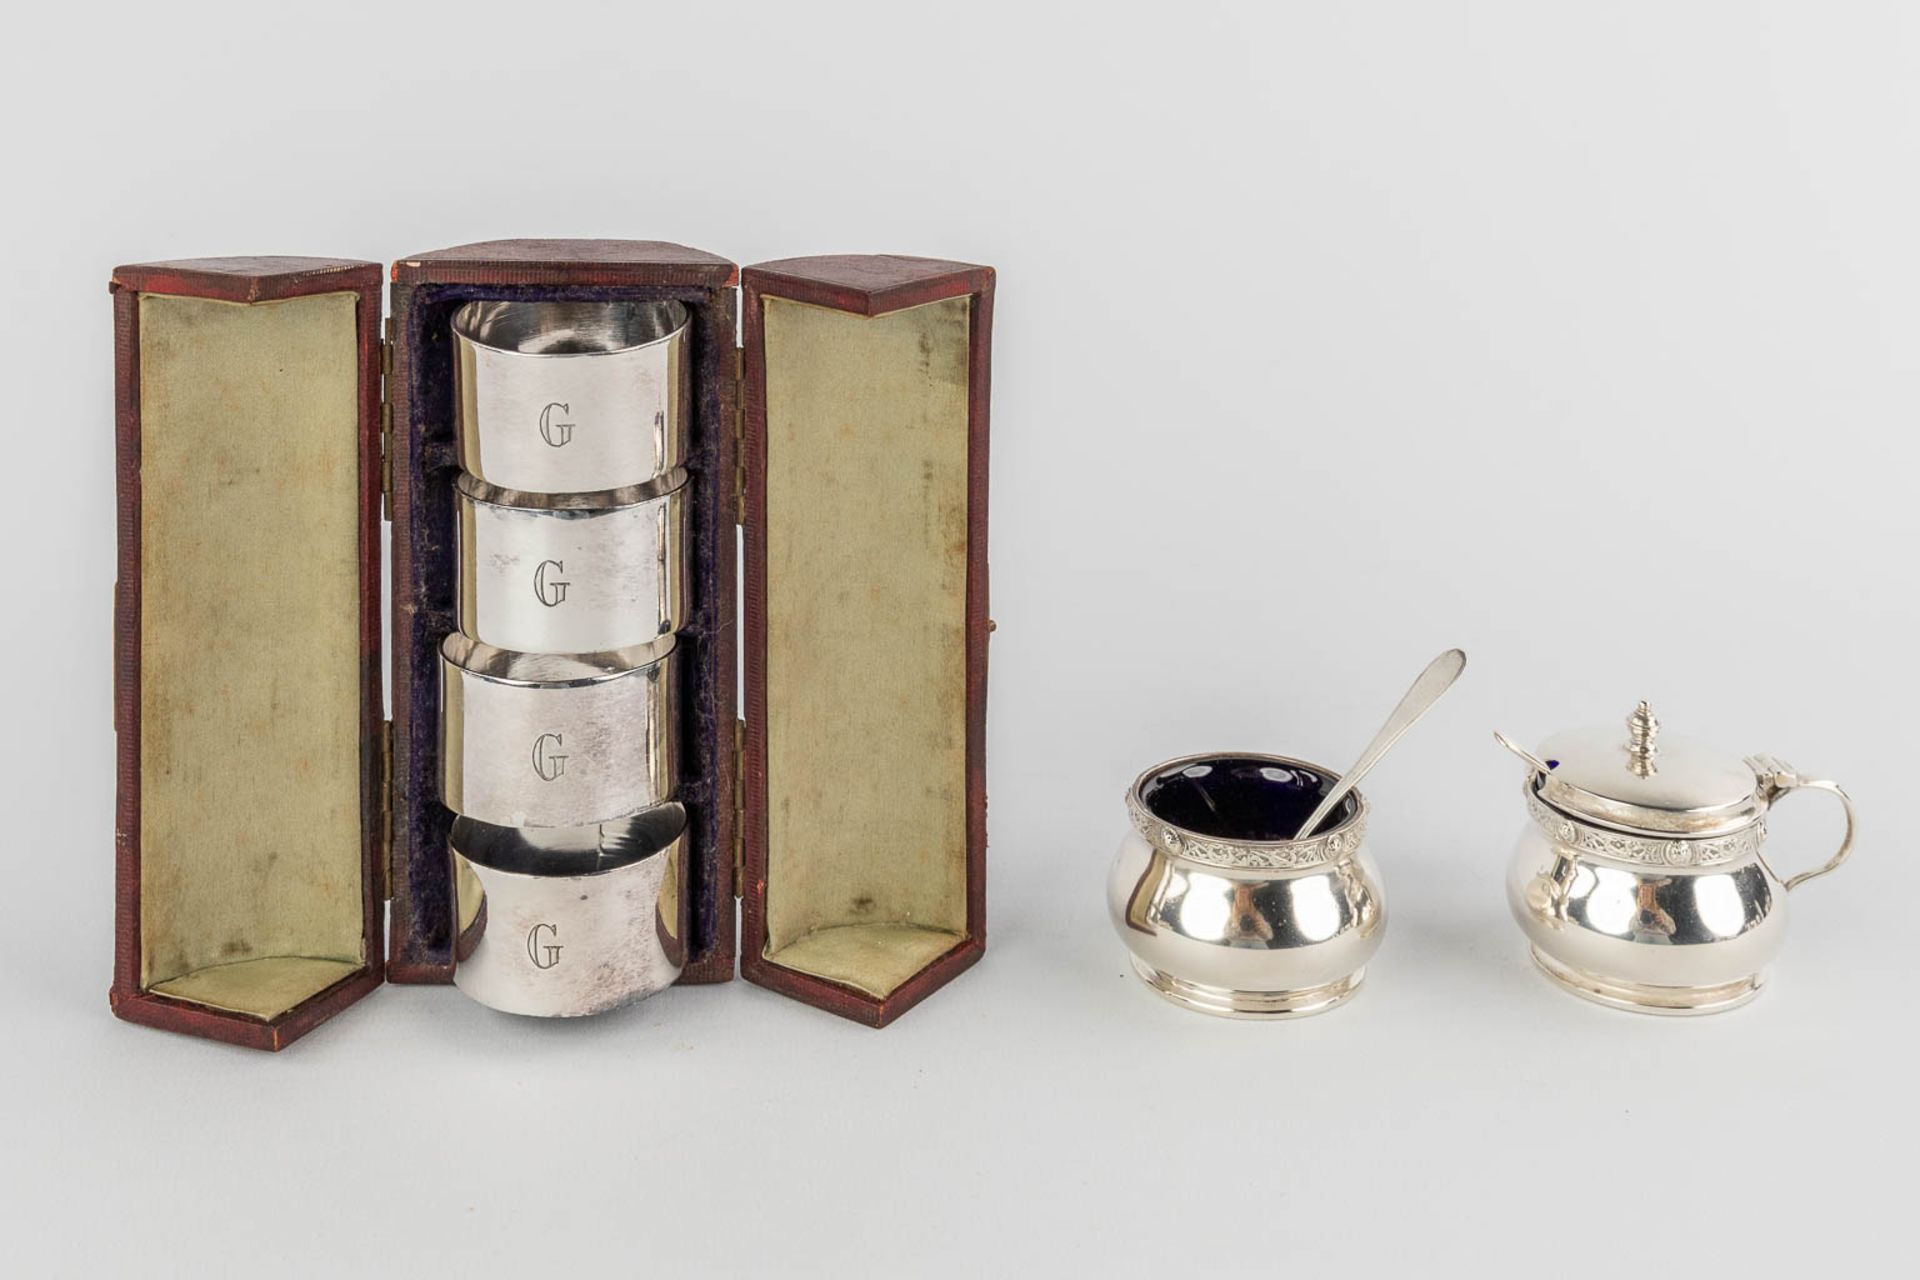 Large collection of silver items, Mostly England. 19th C. Total gross weight: 2915g. (W:22 x H:14 cm - Image 3 of 30